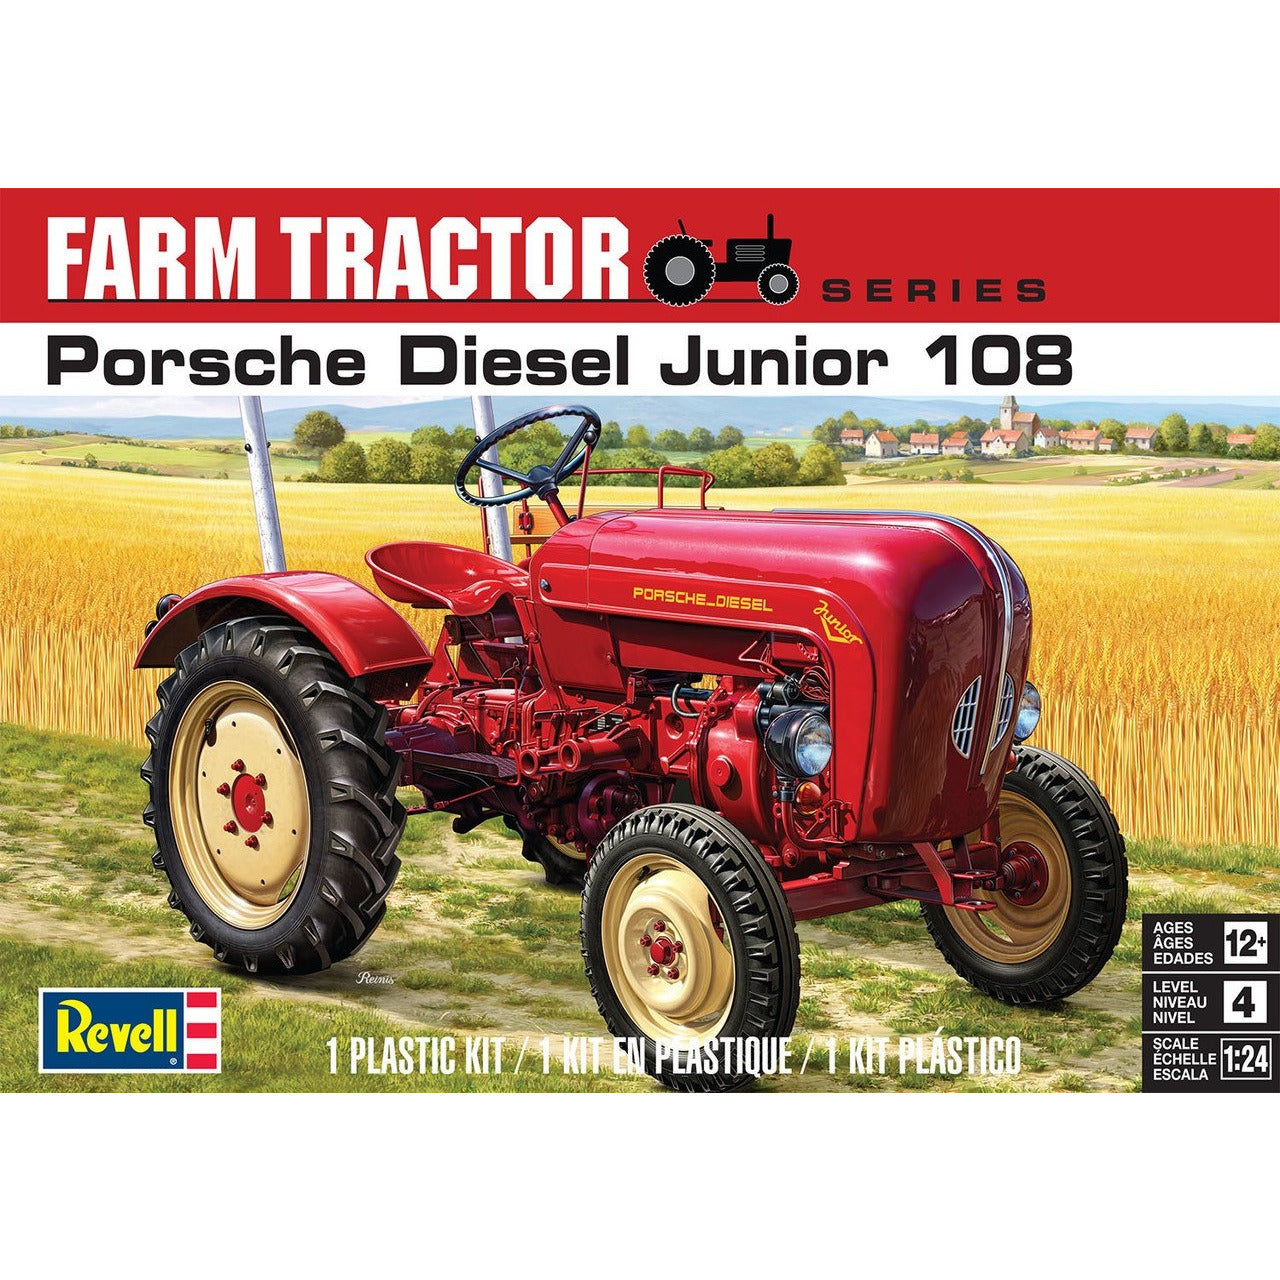 Porsche Diesel Junior 108 Tractor 1/24 Snap Together Model Vehicle Kit #4485 by Revell